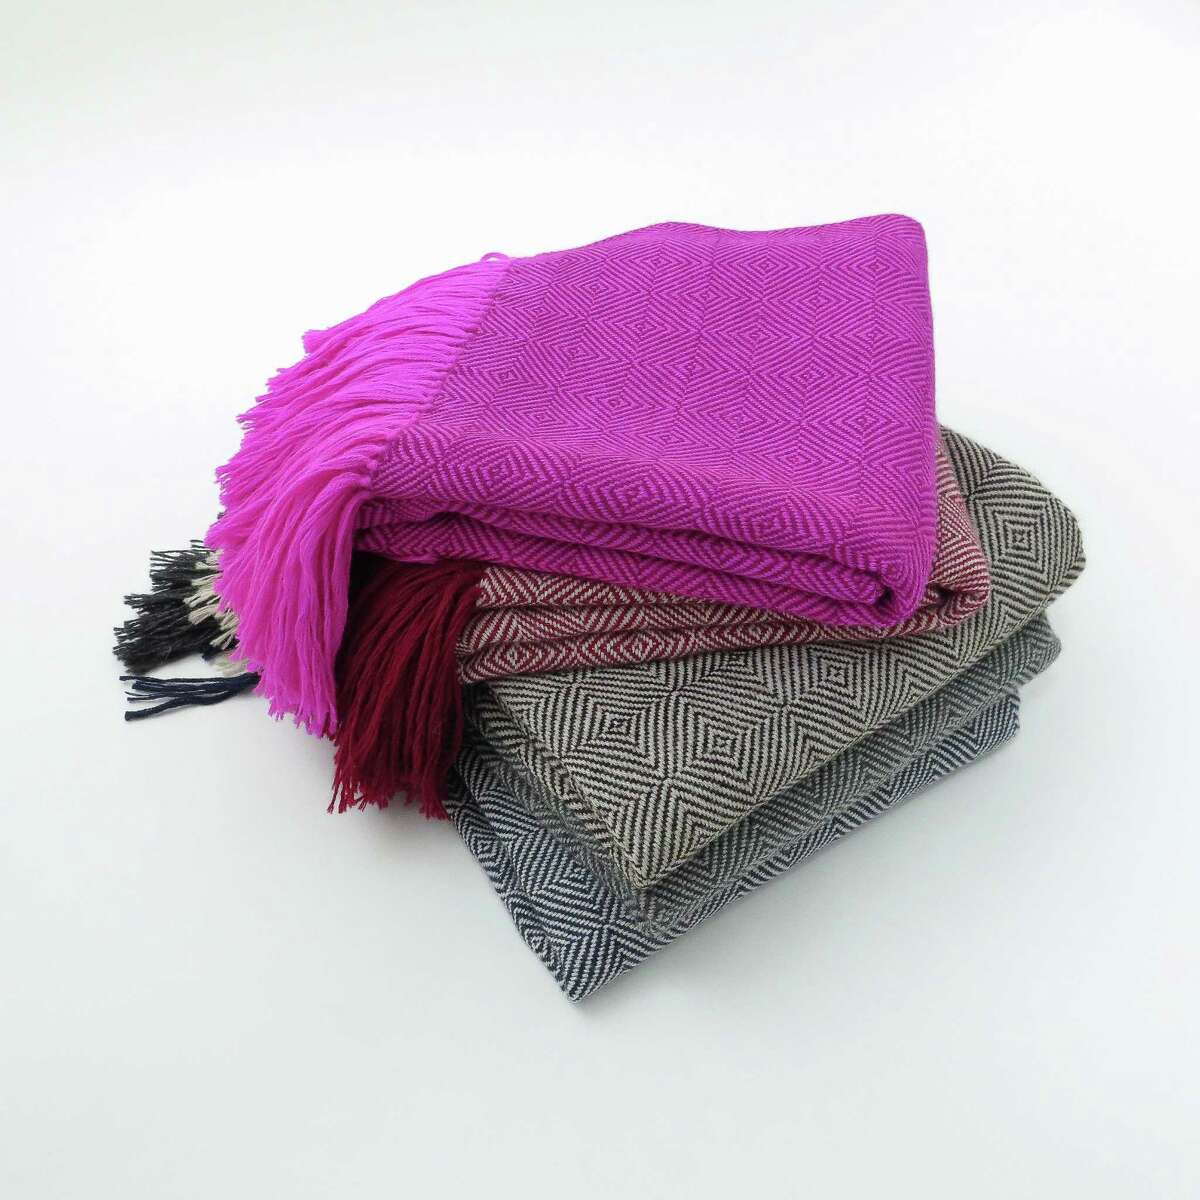 “Alpaca and handwoven cotton throws you can throw on your bed or use as a shawl.” — Erica Tanov, clothing and textile designer and store owner. Alpaca throws, $624 each. shop.ericatanov.com